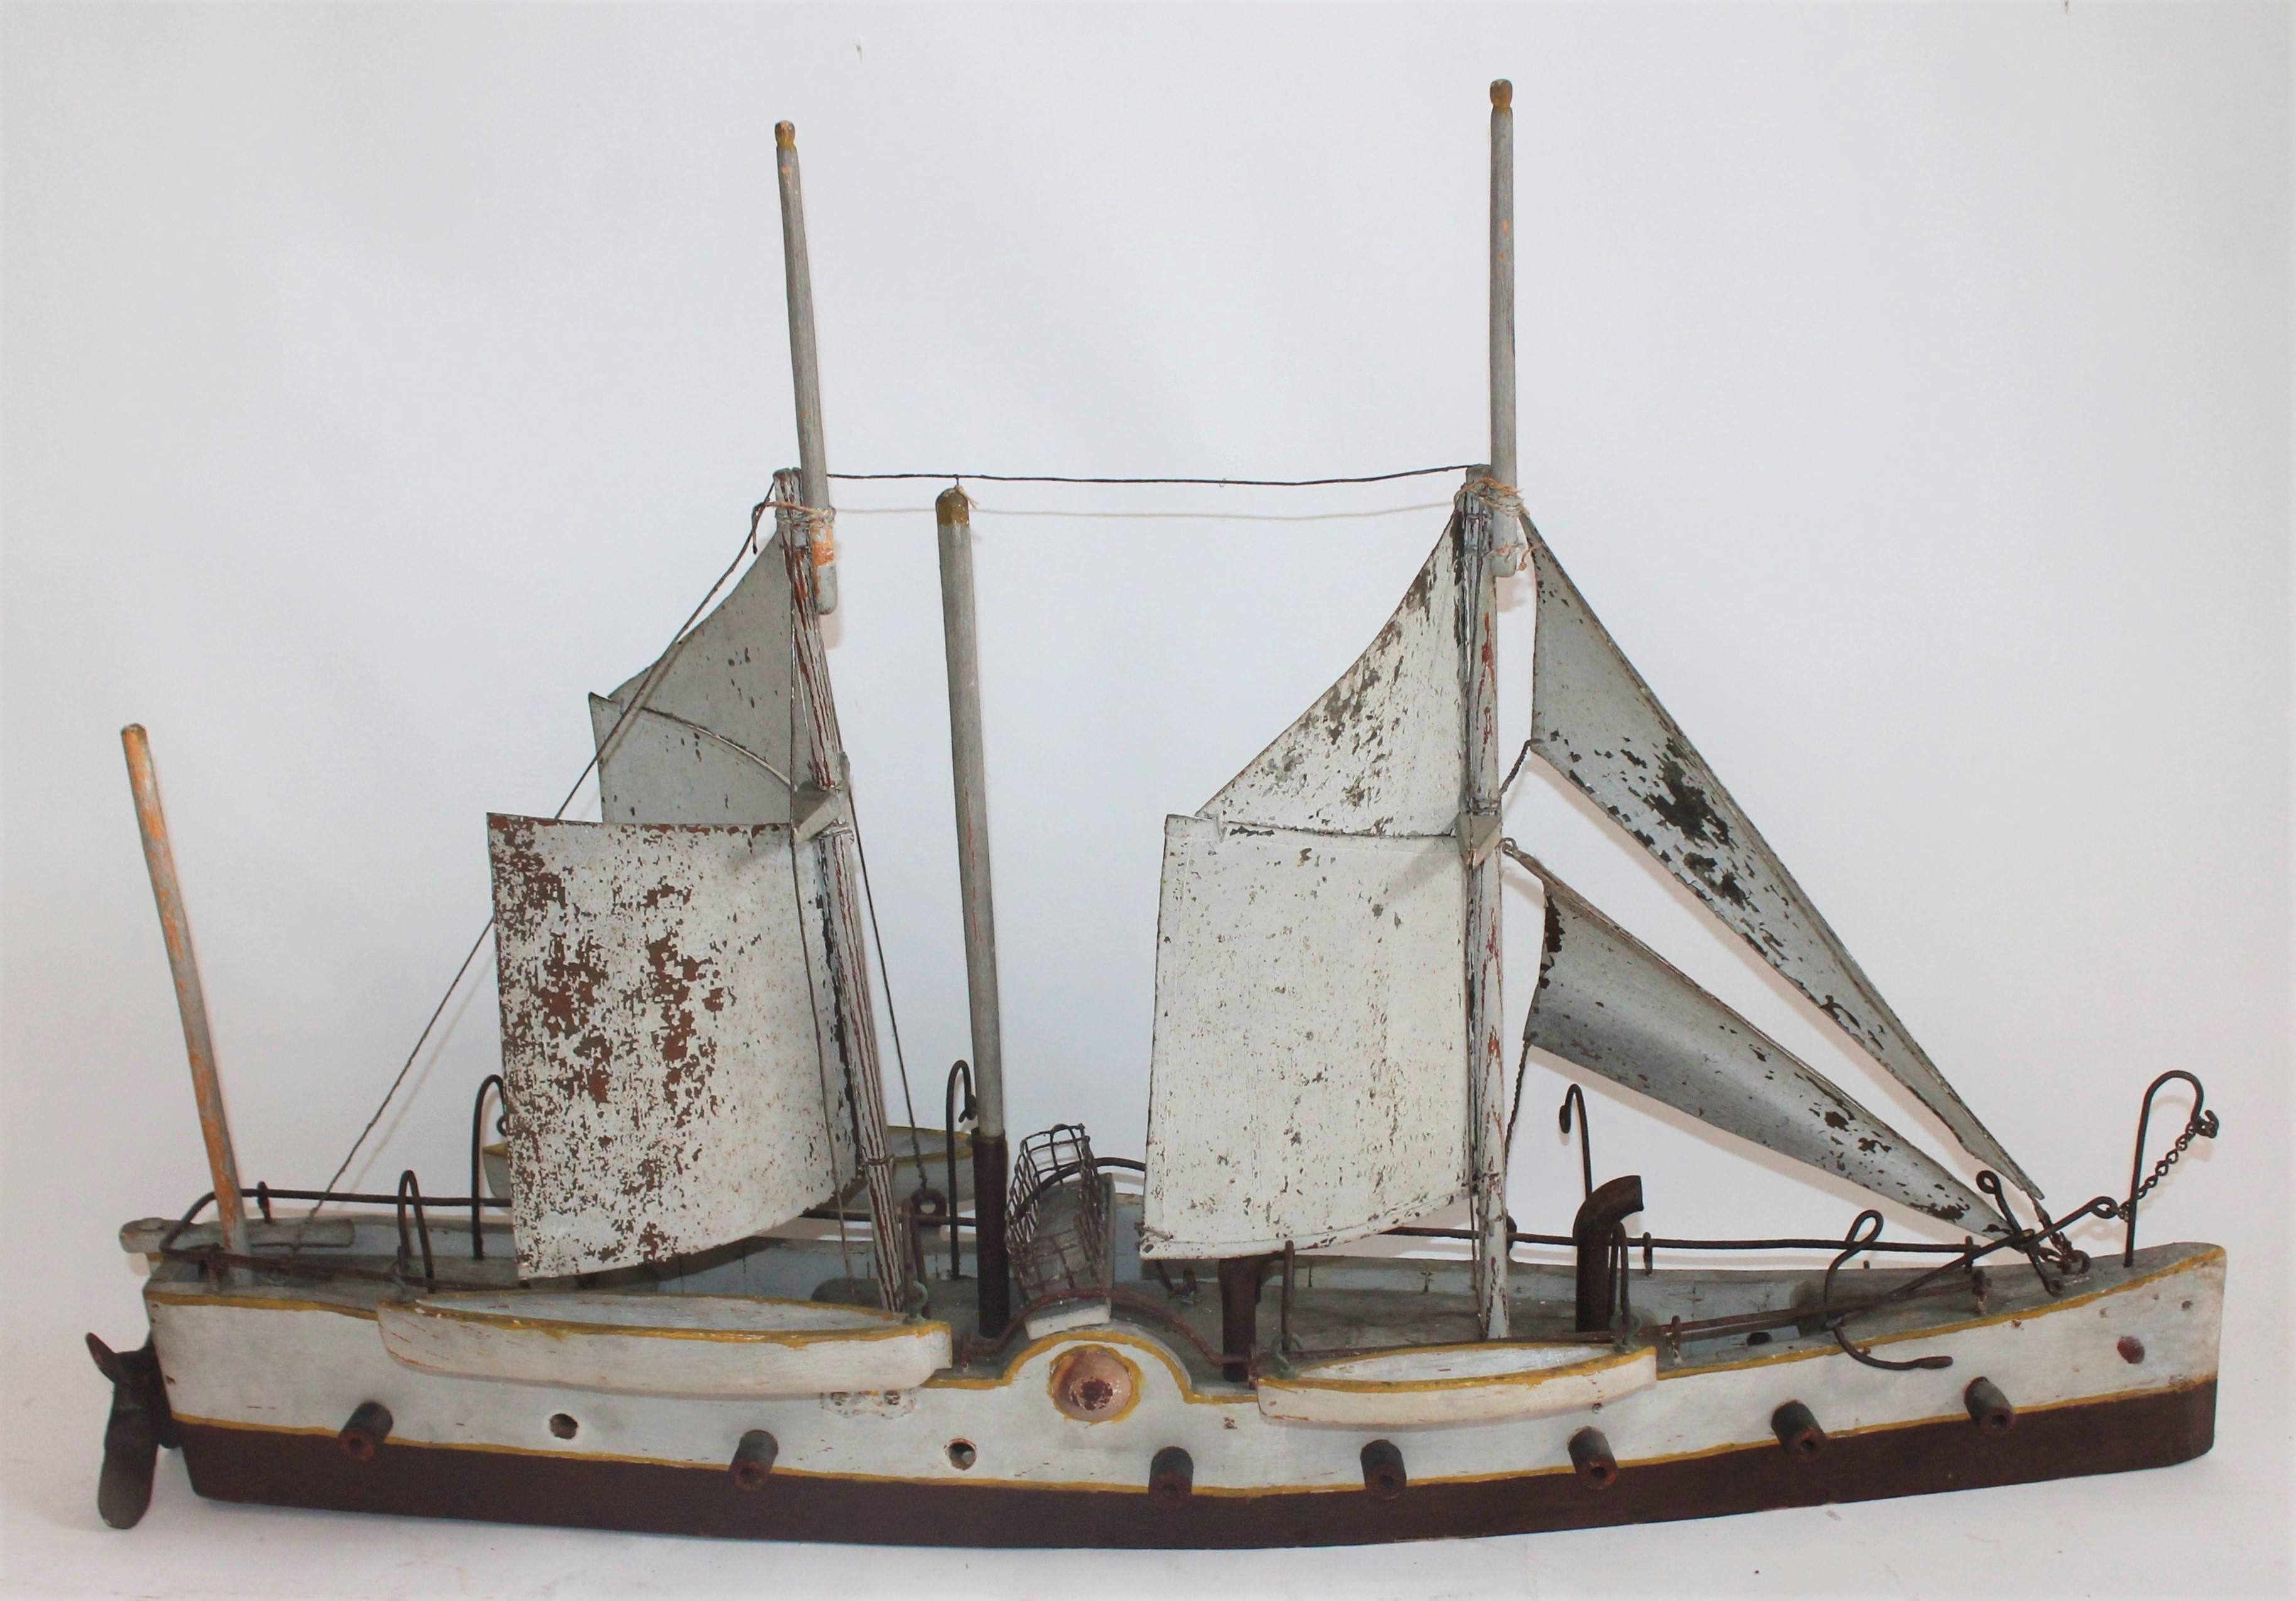 Early 20th century handmade and painted battleship boat found in the state of Maine. This fine folk art model boat was hand crafted vessel and has three life boats and the sides along with a handmade wire anchor on the front right hand side. The